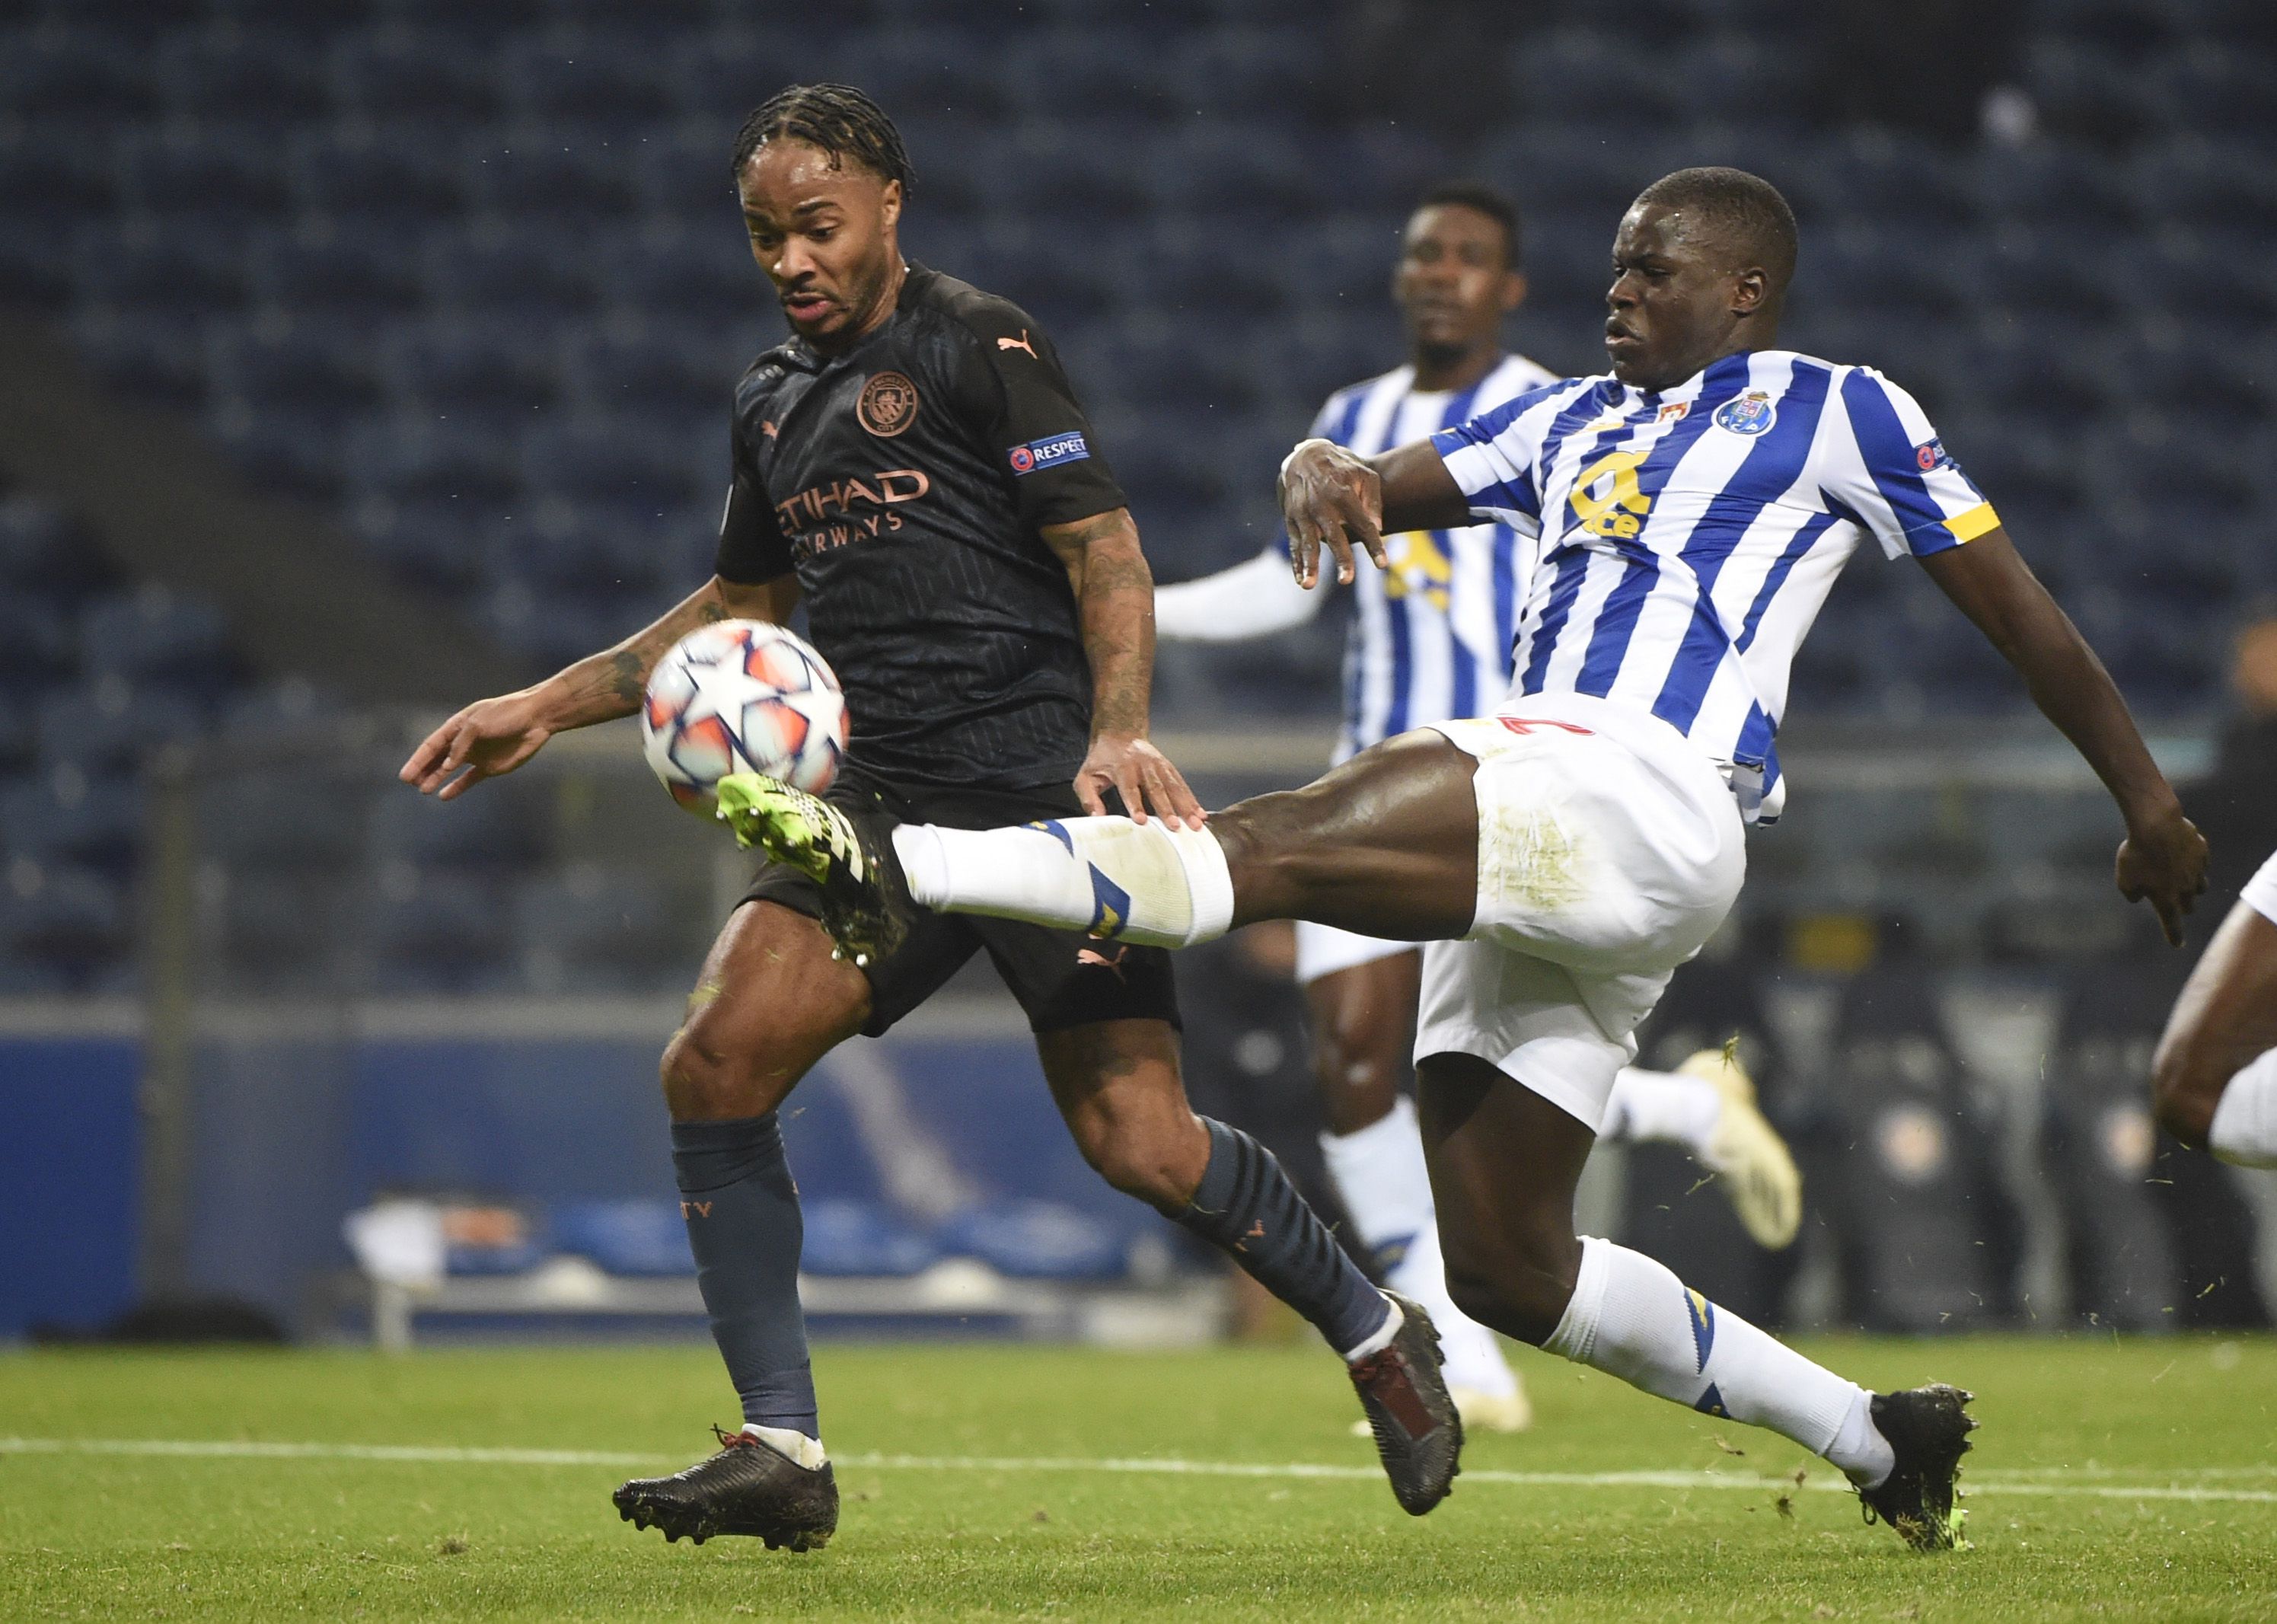 Soccer Football - Champions League - Group C - FC Porto v Manchester City - Estadio do Dragao, Porto, Portugal - December 1, 2020 Manchester City's Raheem Sterling in action with FC Porto's Malang Sarr Pool via REUTERS/Miguel Riopa